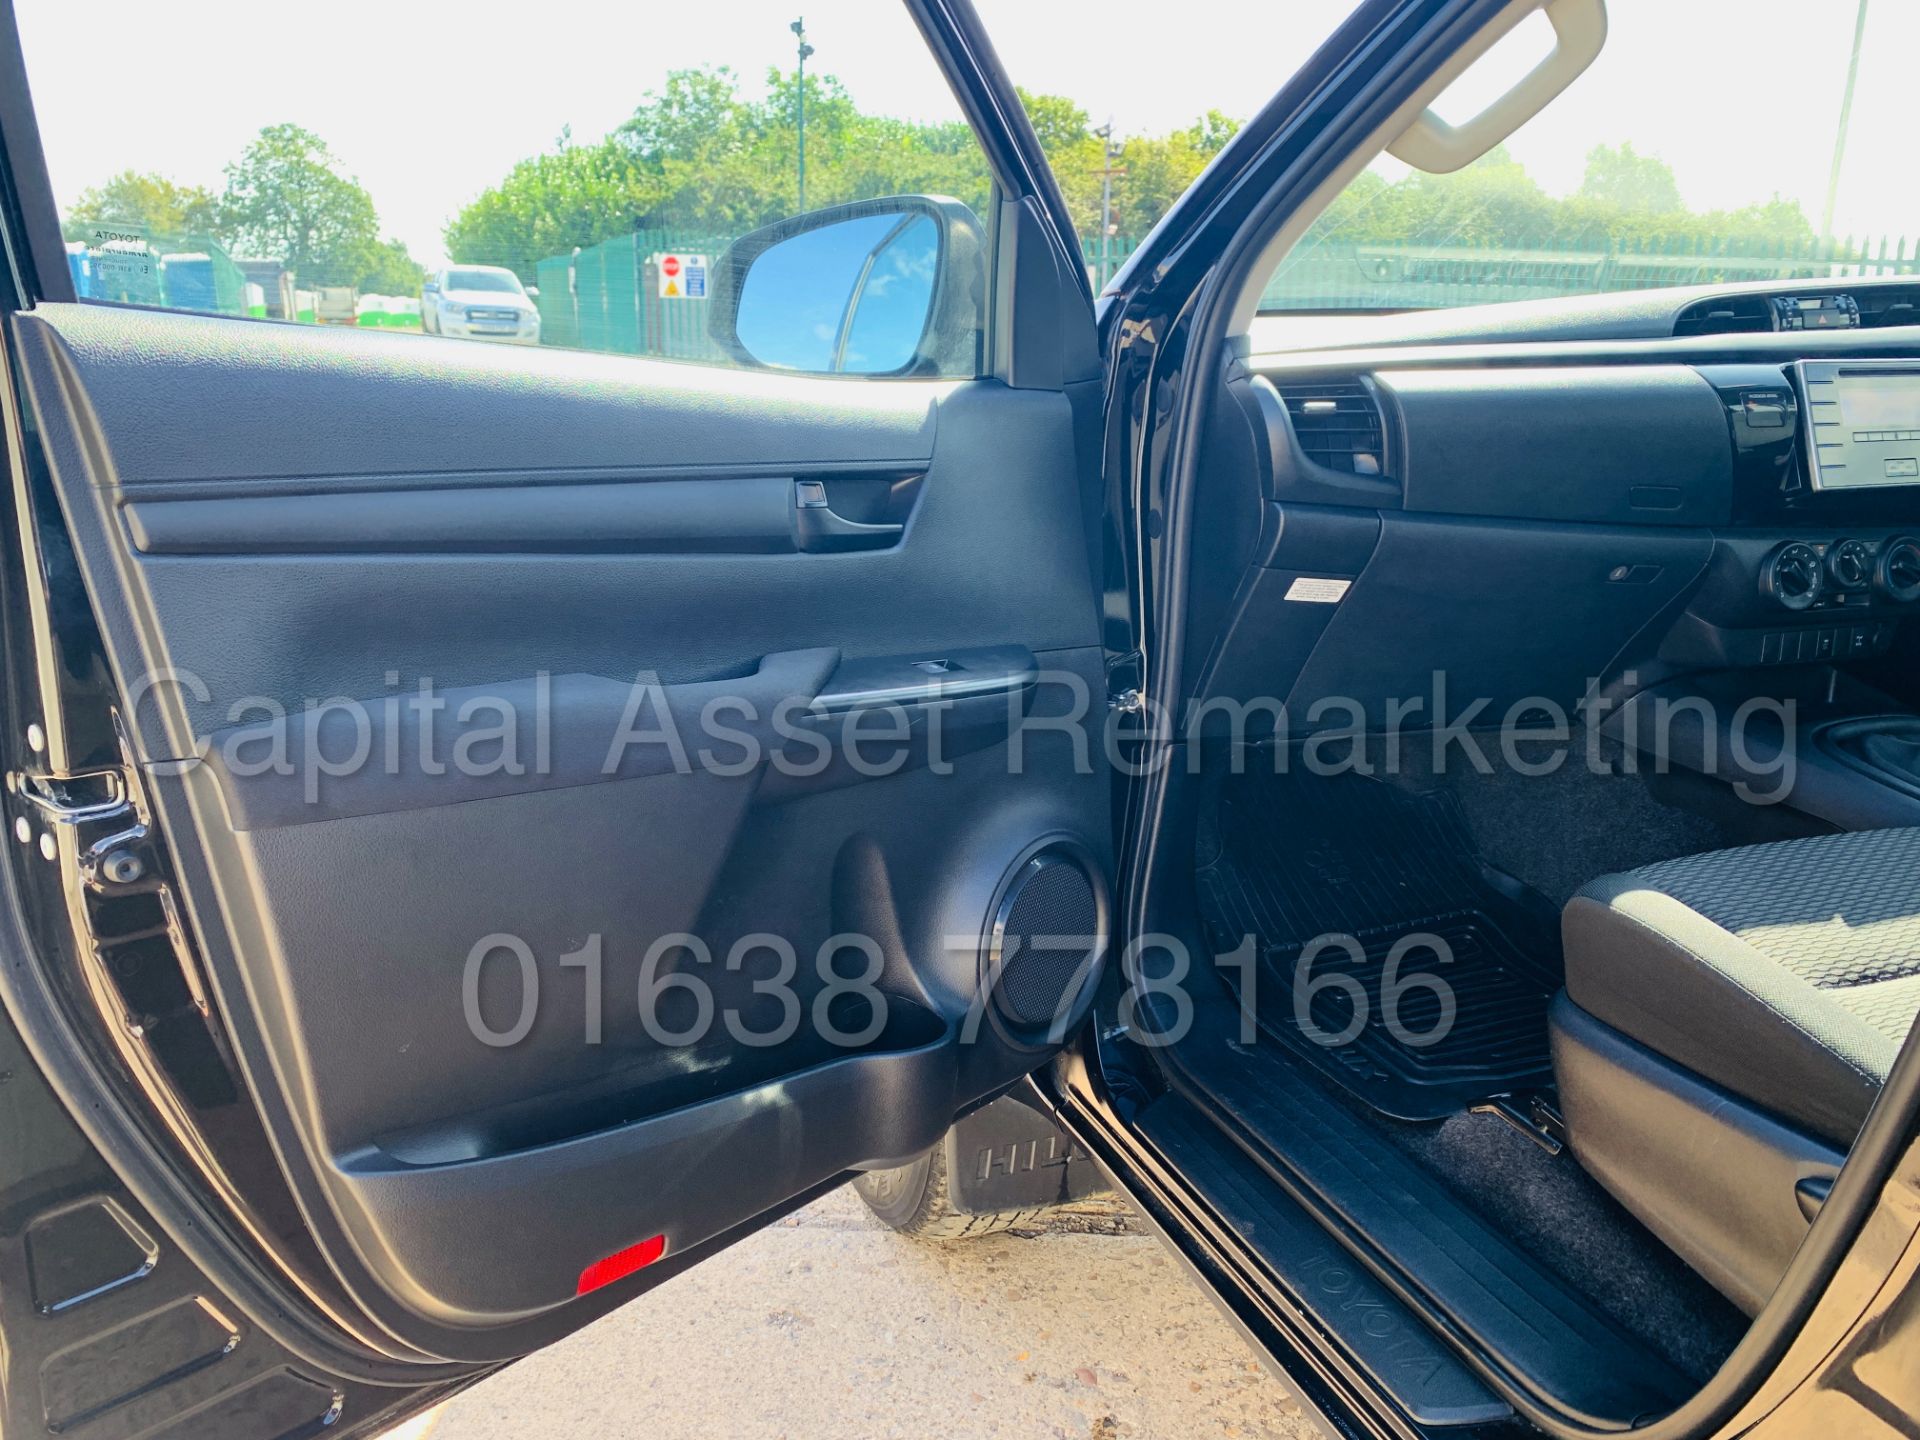 On Sale TOYOTA HILUX *BLACK EDITION* D/CAB PICK-UP (2017 - NEW MODEL) 2.4 D-4D -150 BHP- *LOW MILES* - Image 15 of 43